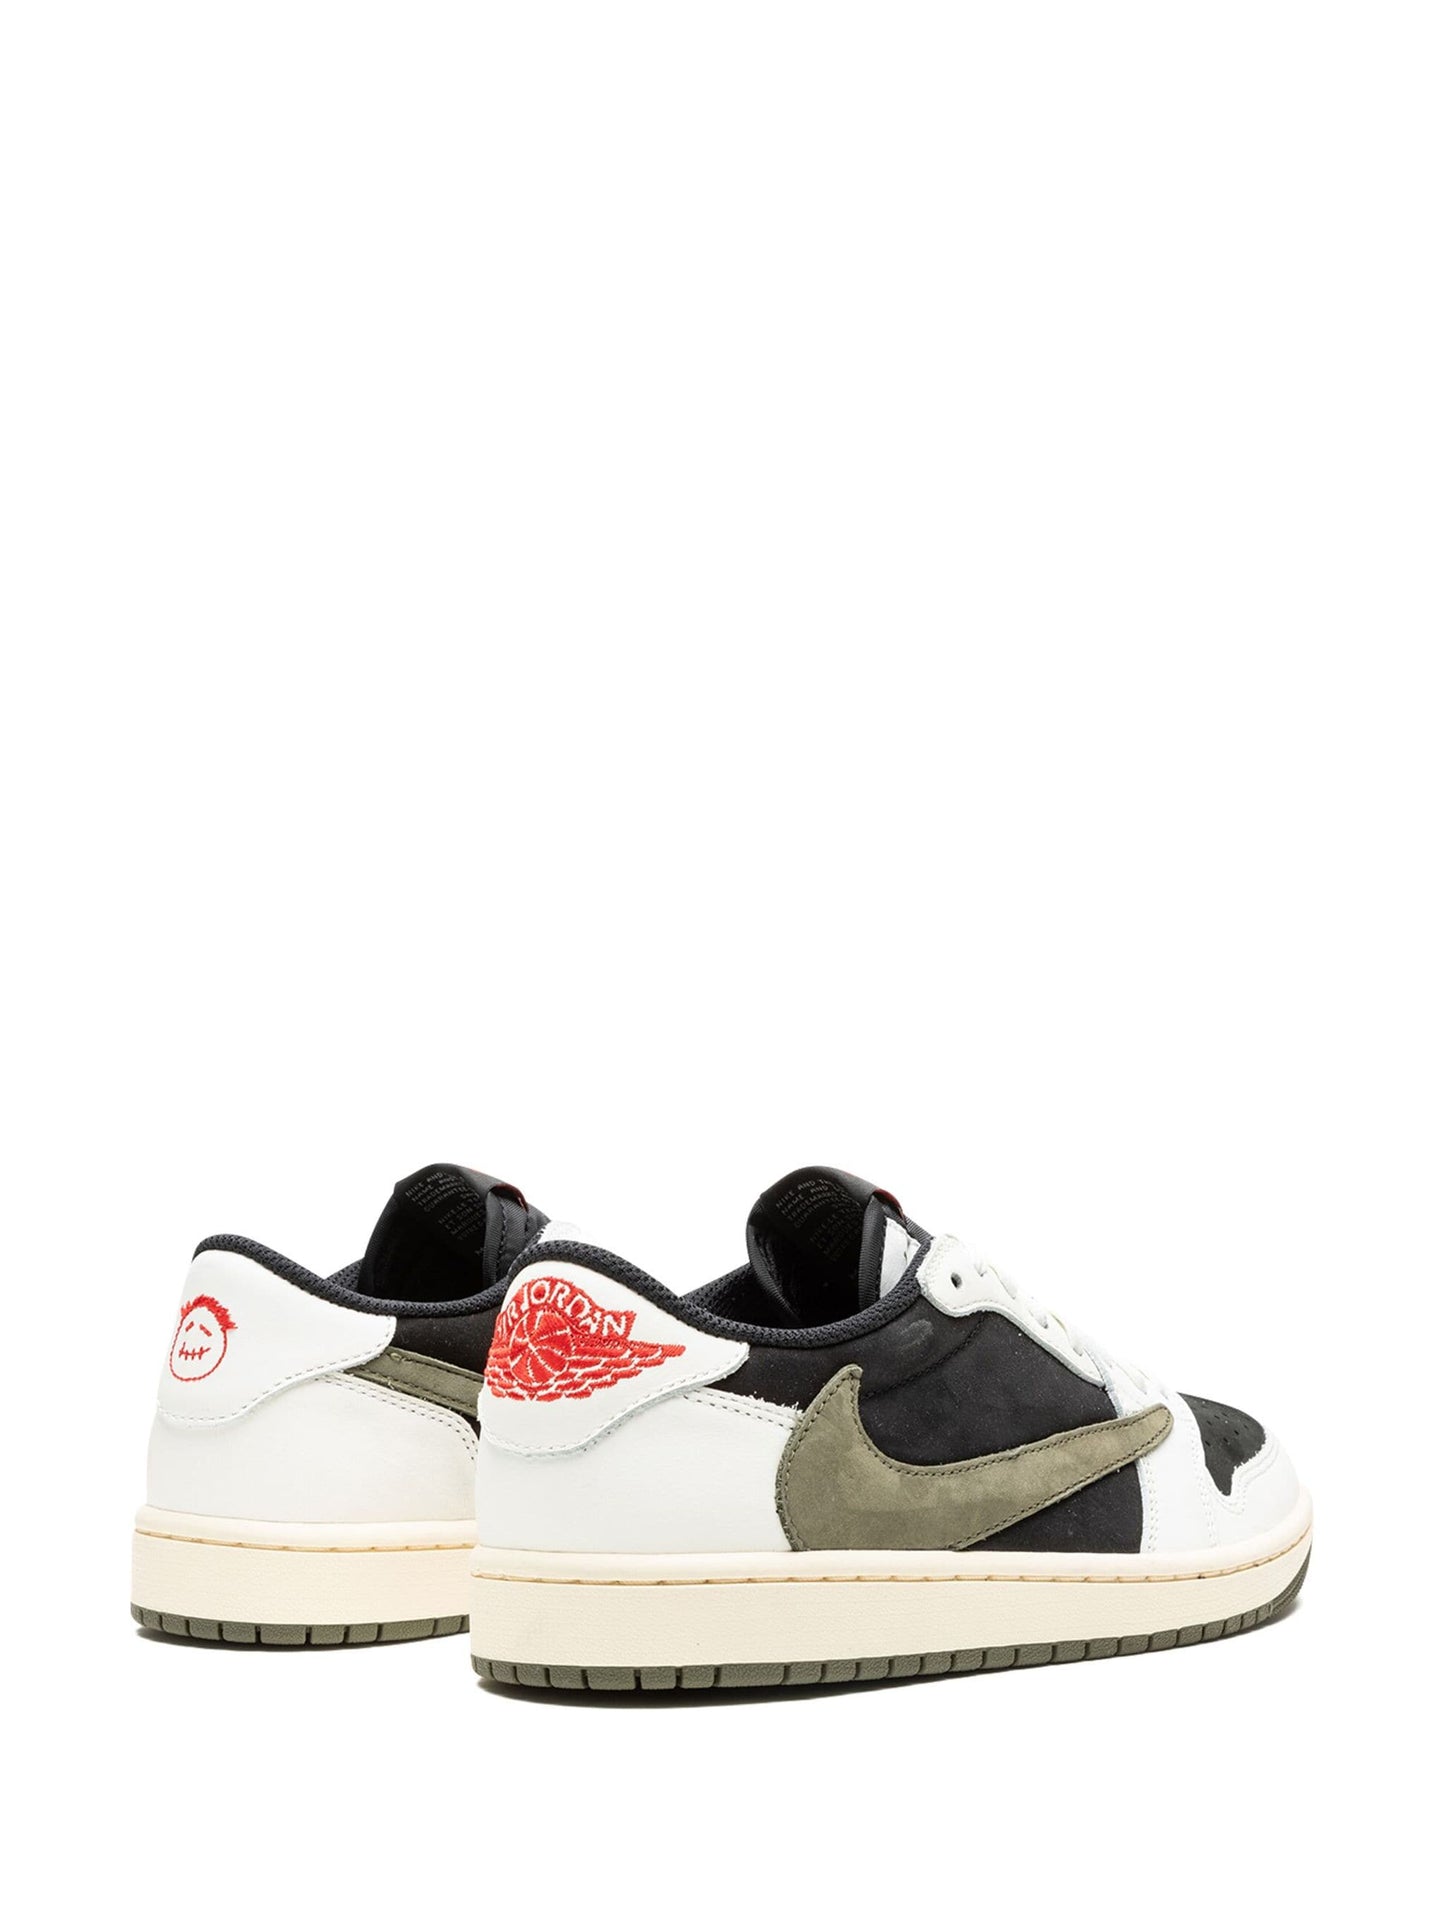 JoieJoli™ - #019 Sneakers Air-J retro low OG SP "T.S" Olive